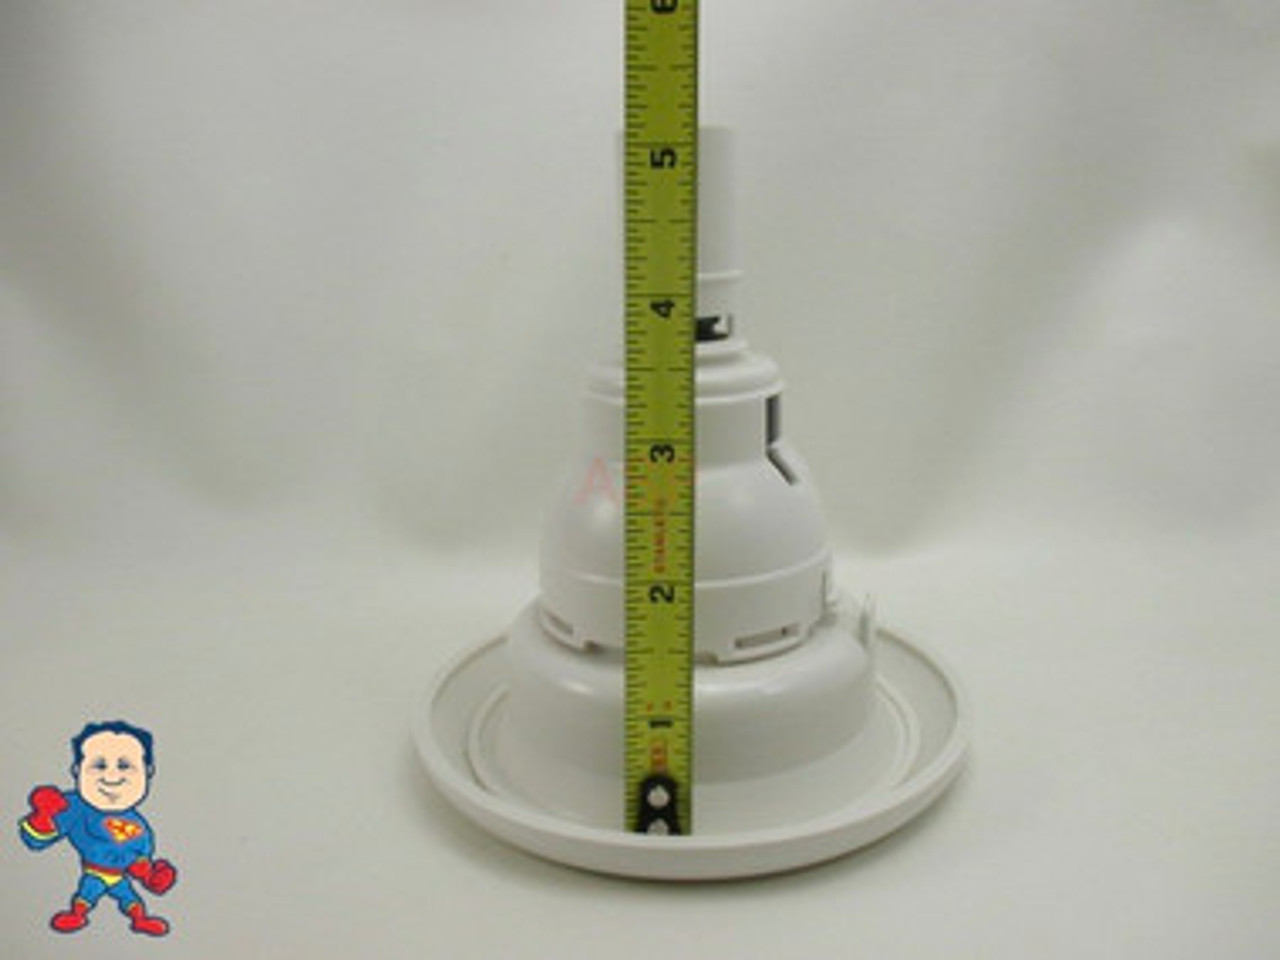 Jet Internal, Waterway, Power Storm, 5" face diameter, Directional, 5 Scallop, White Smooth